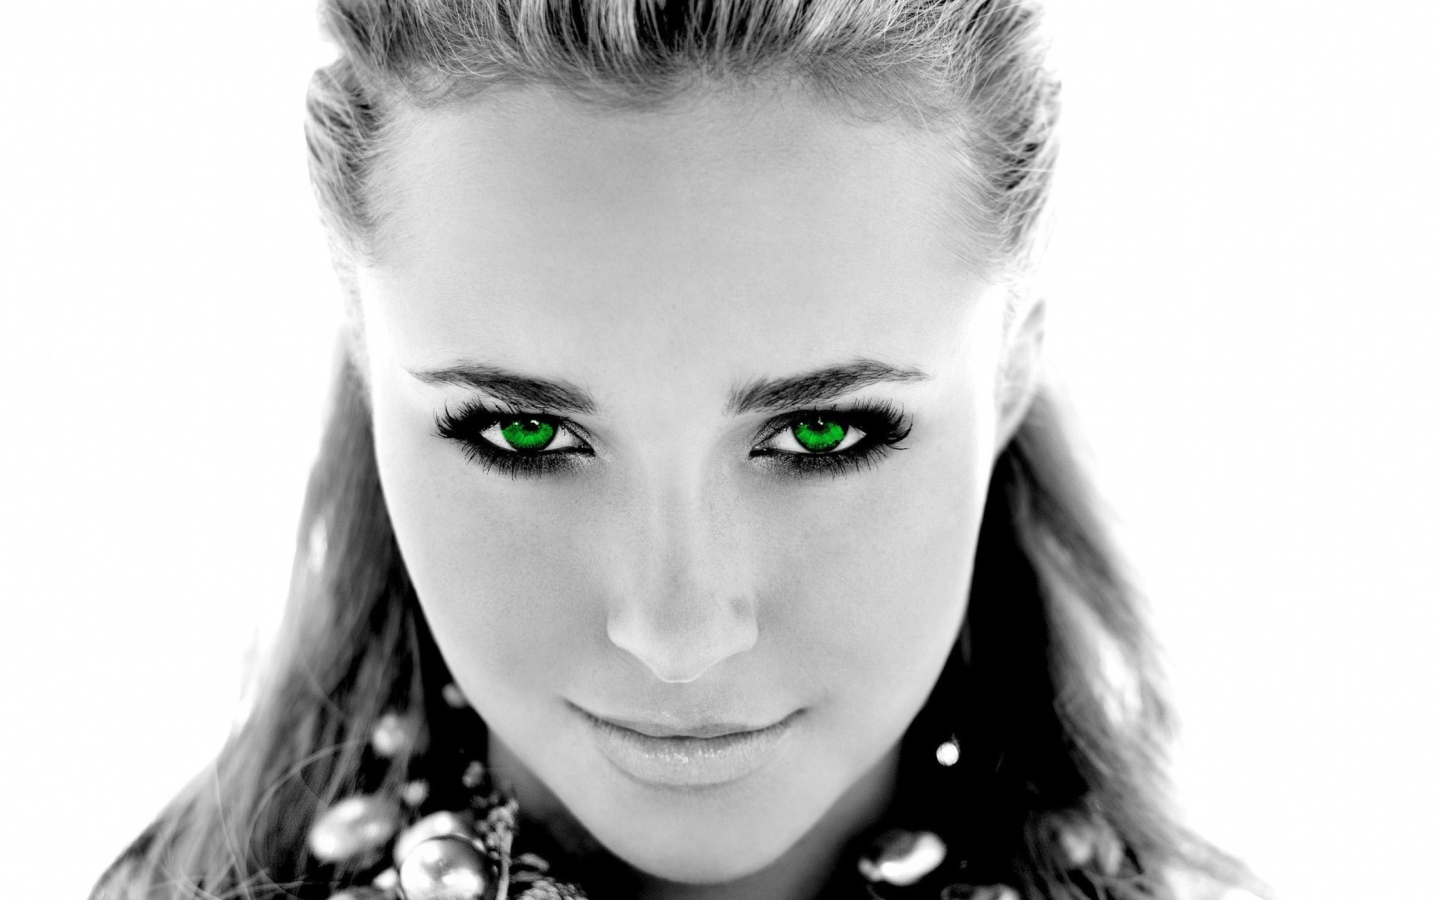 Girl With Green Eyes wallpaper 1440x900